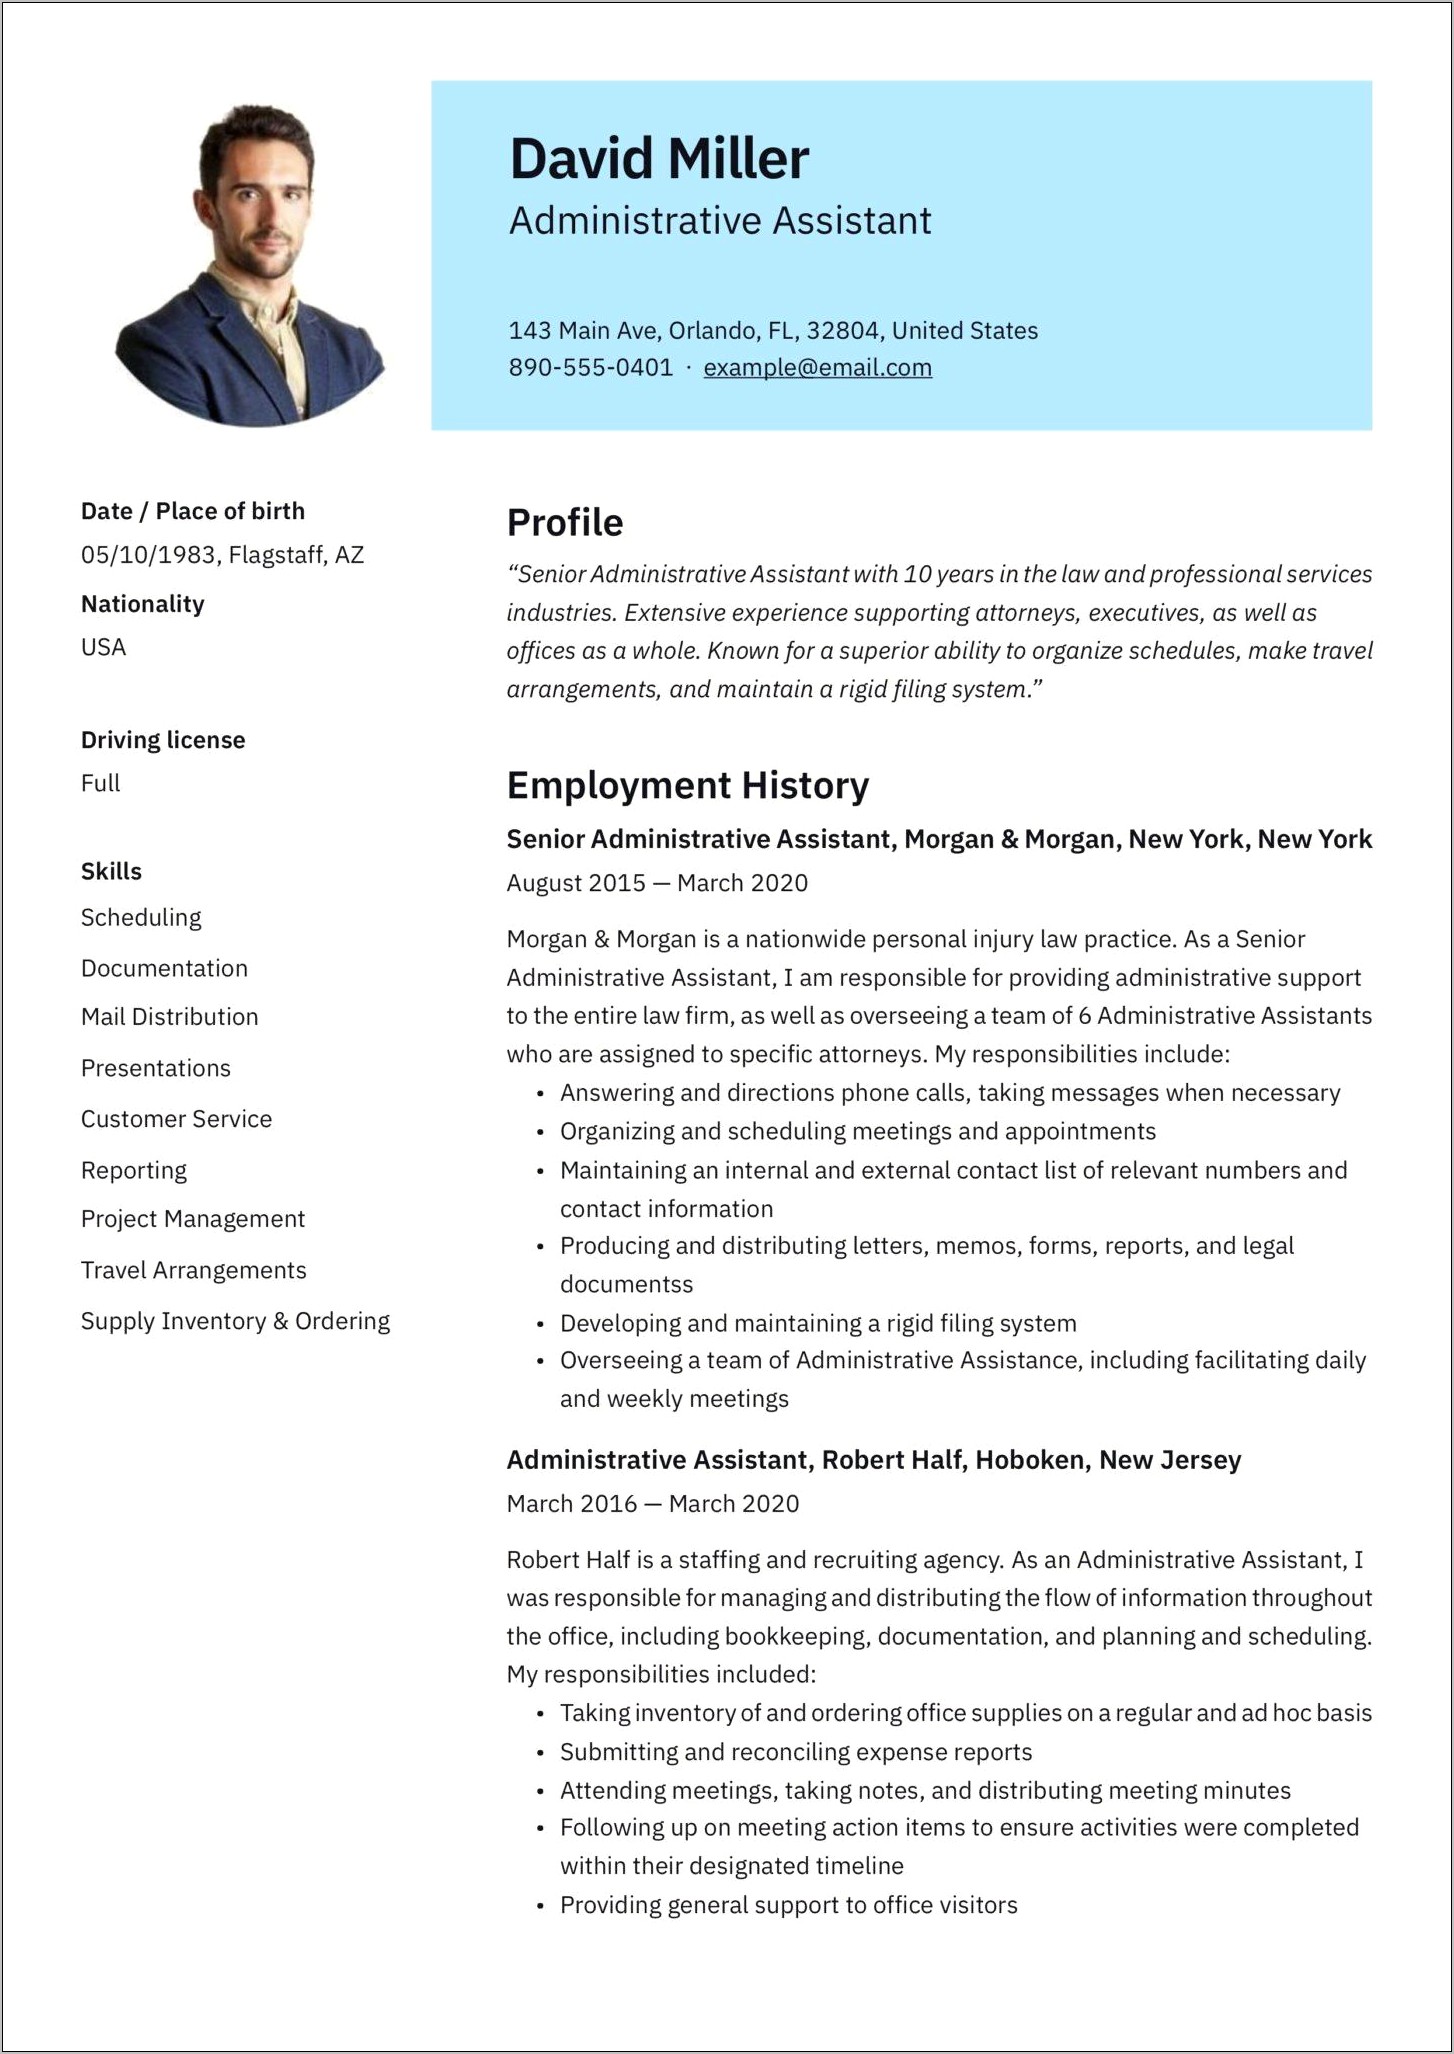 Experienced Administrative Assistant Resume Template Microsoft Word